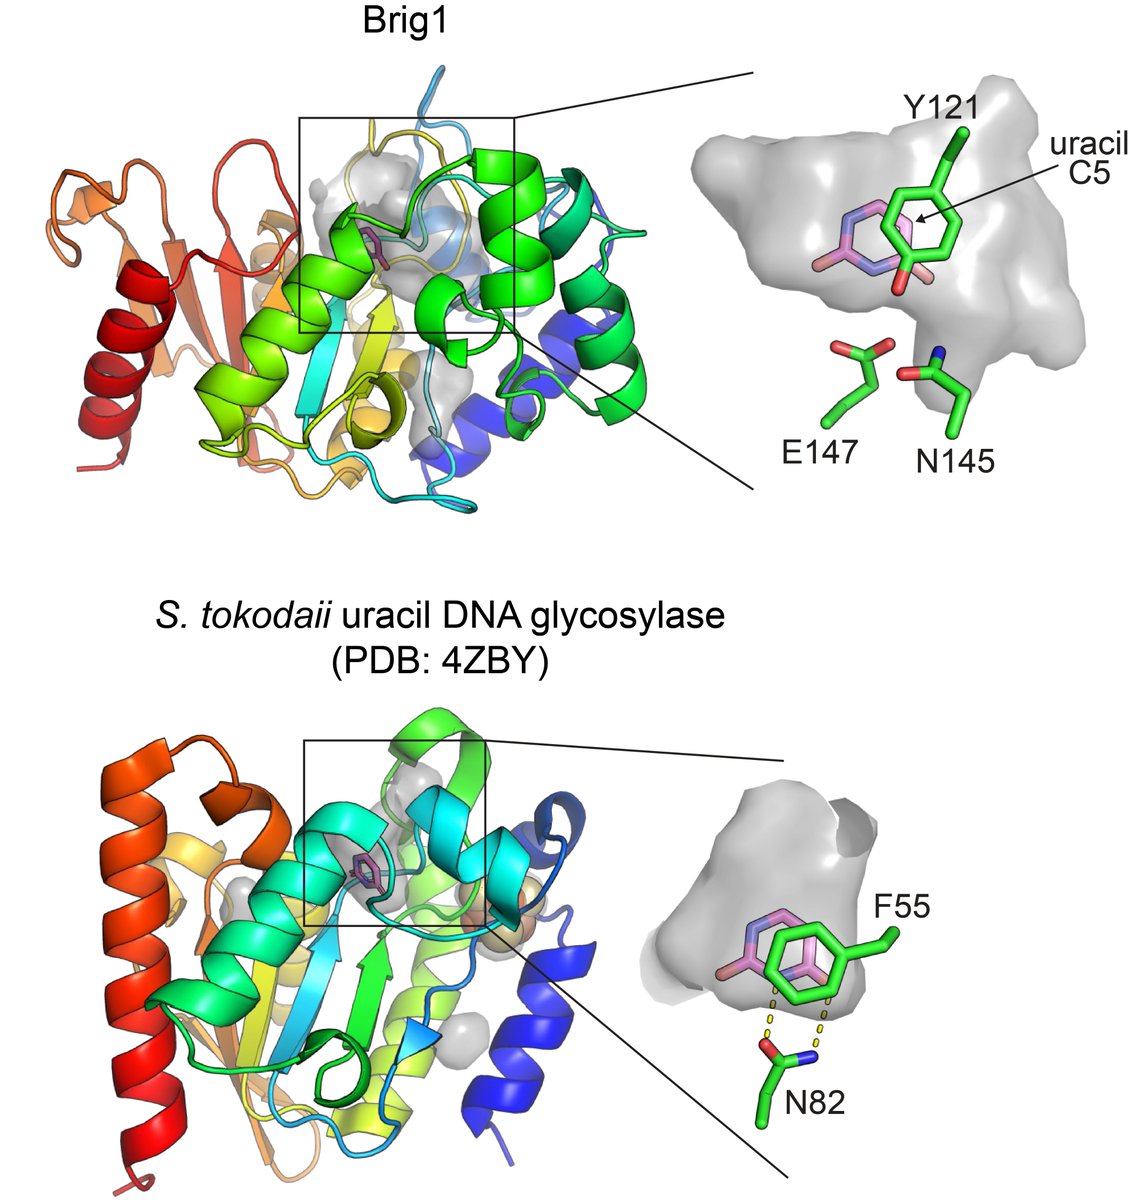 AlphaFold2 modeling of Brig1 showed structural homology to uracil DNA glycosylases, but with a larger predicted substrate pocket in the Brig1 model 👀  8/